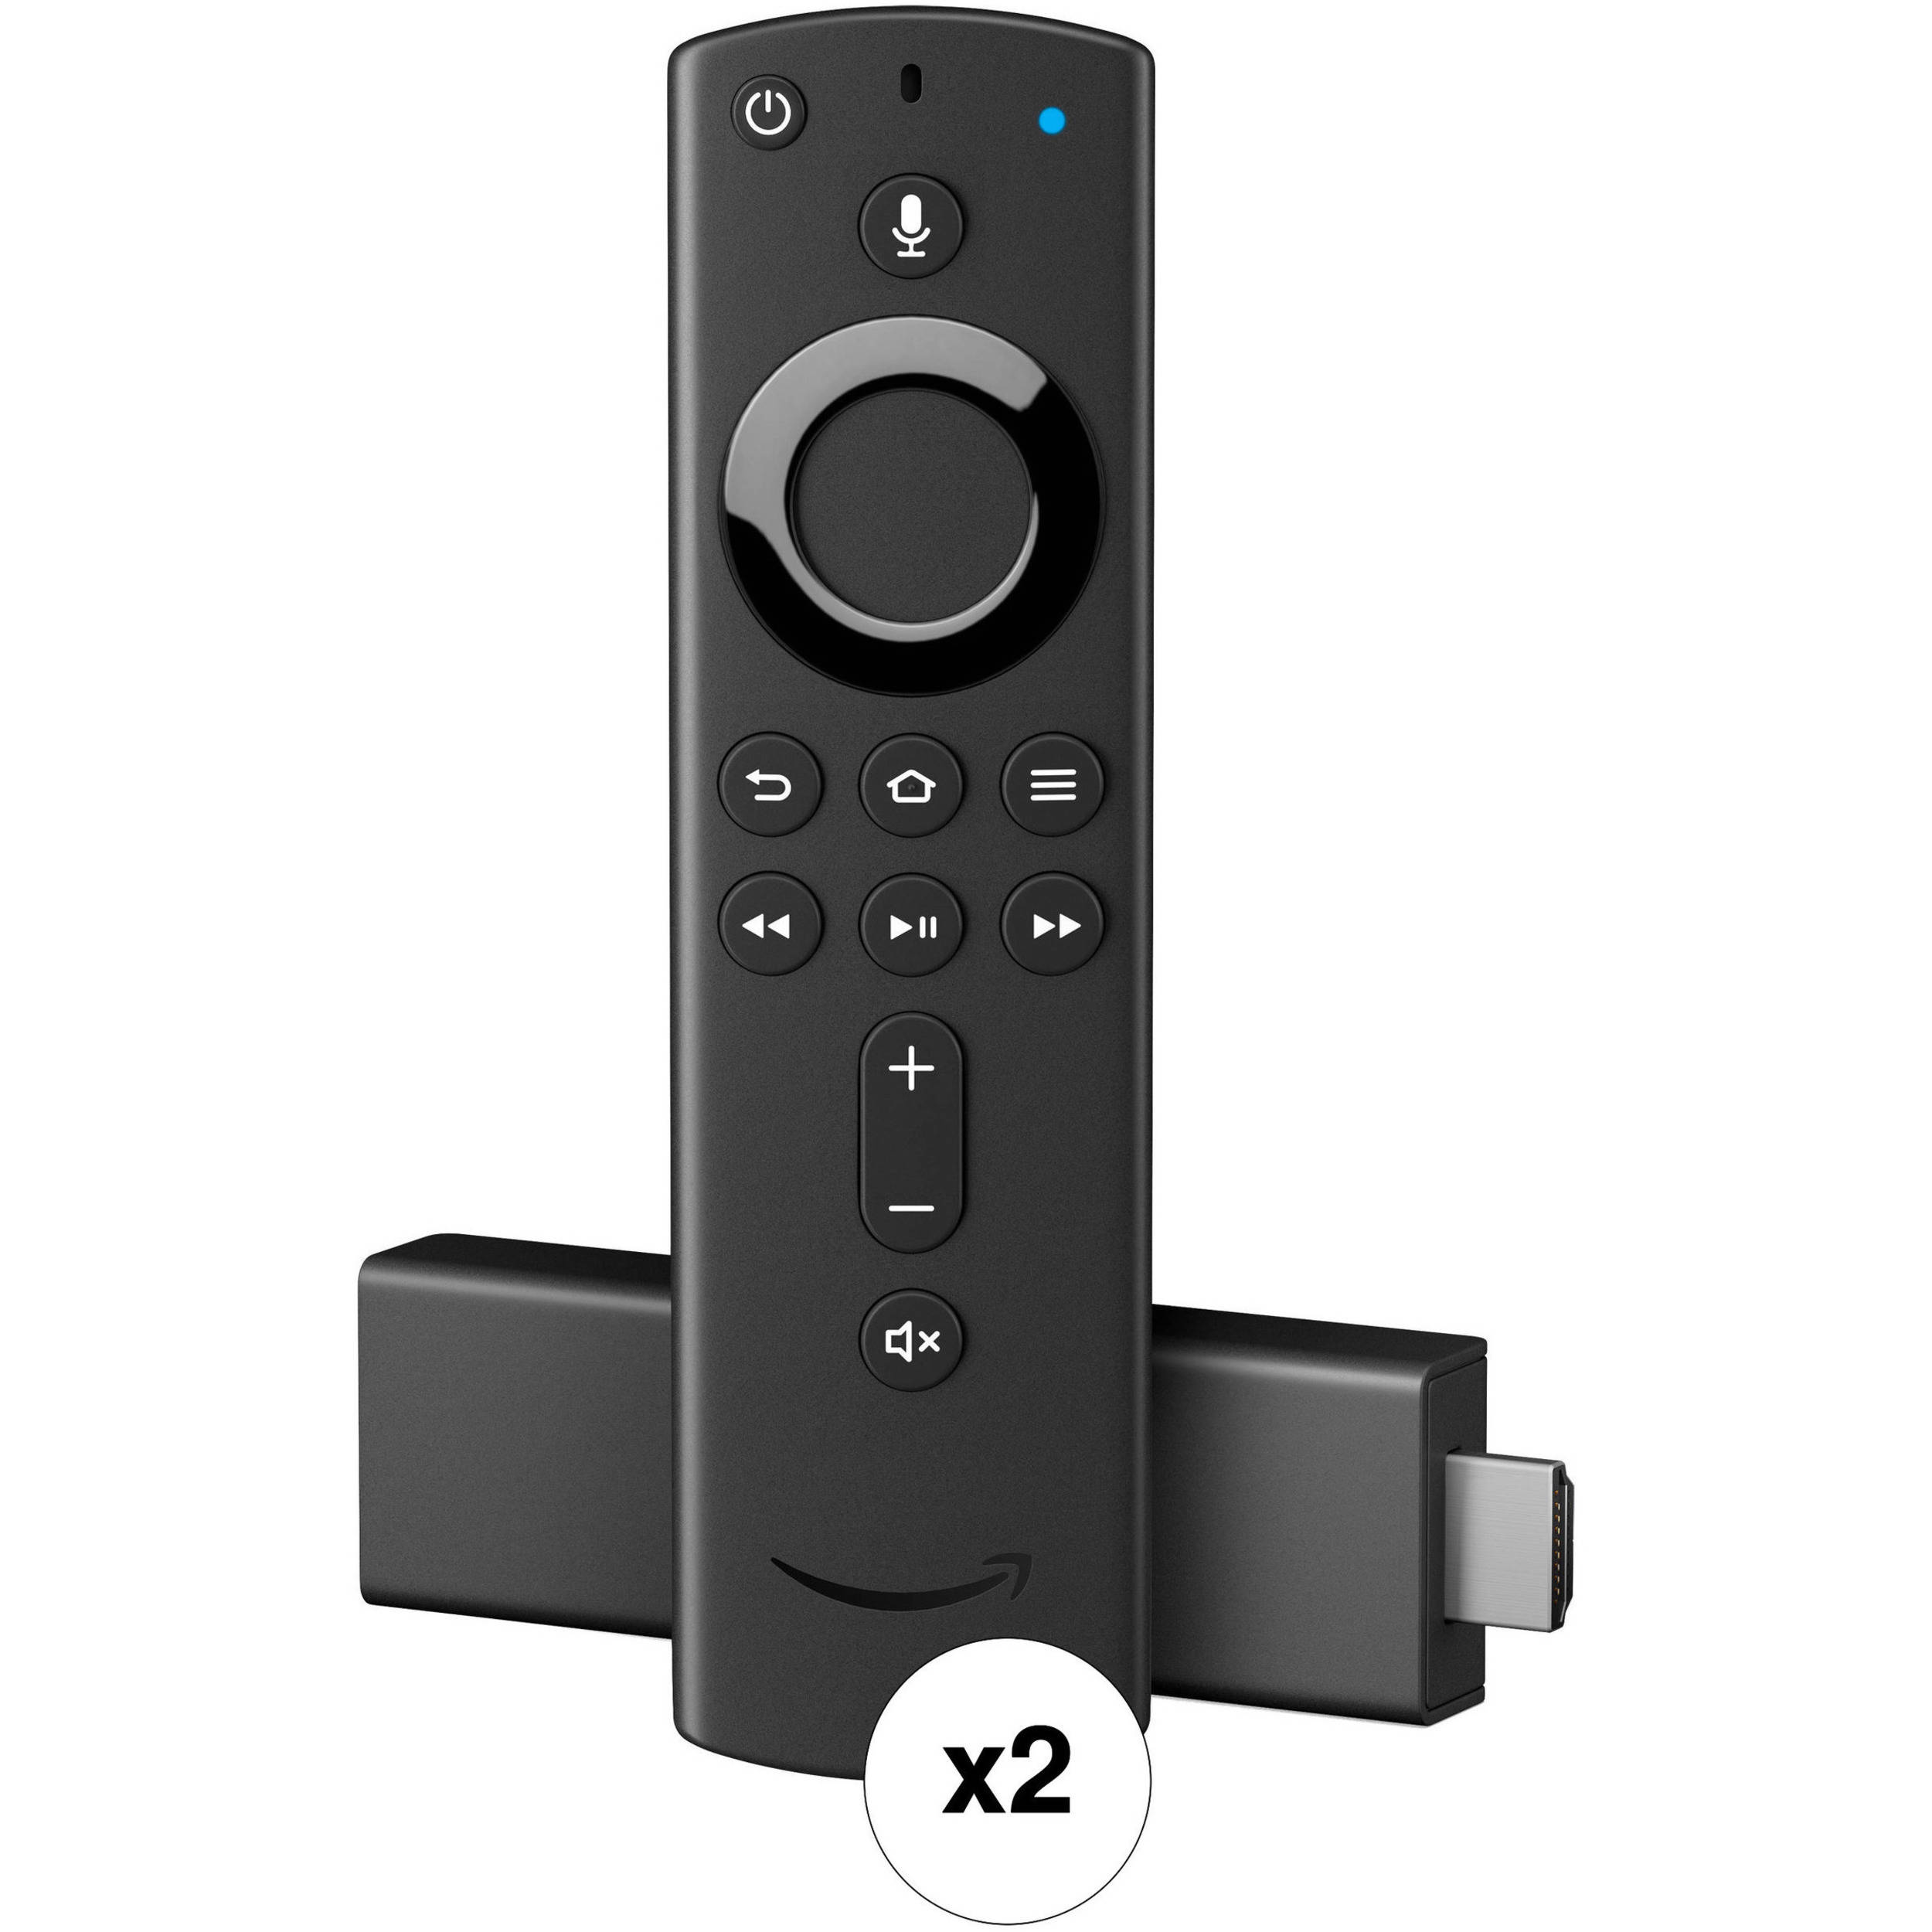 what is included with amazon fire stick